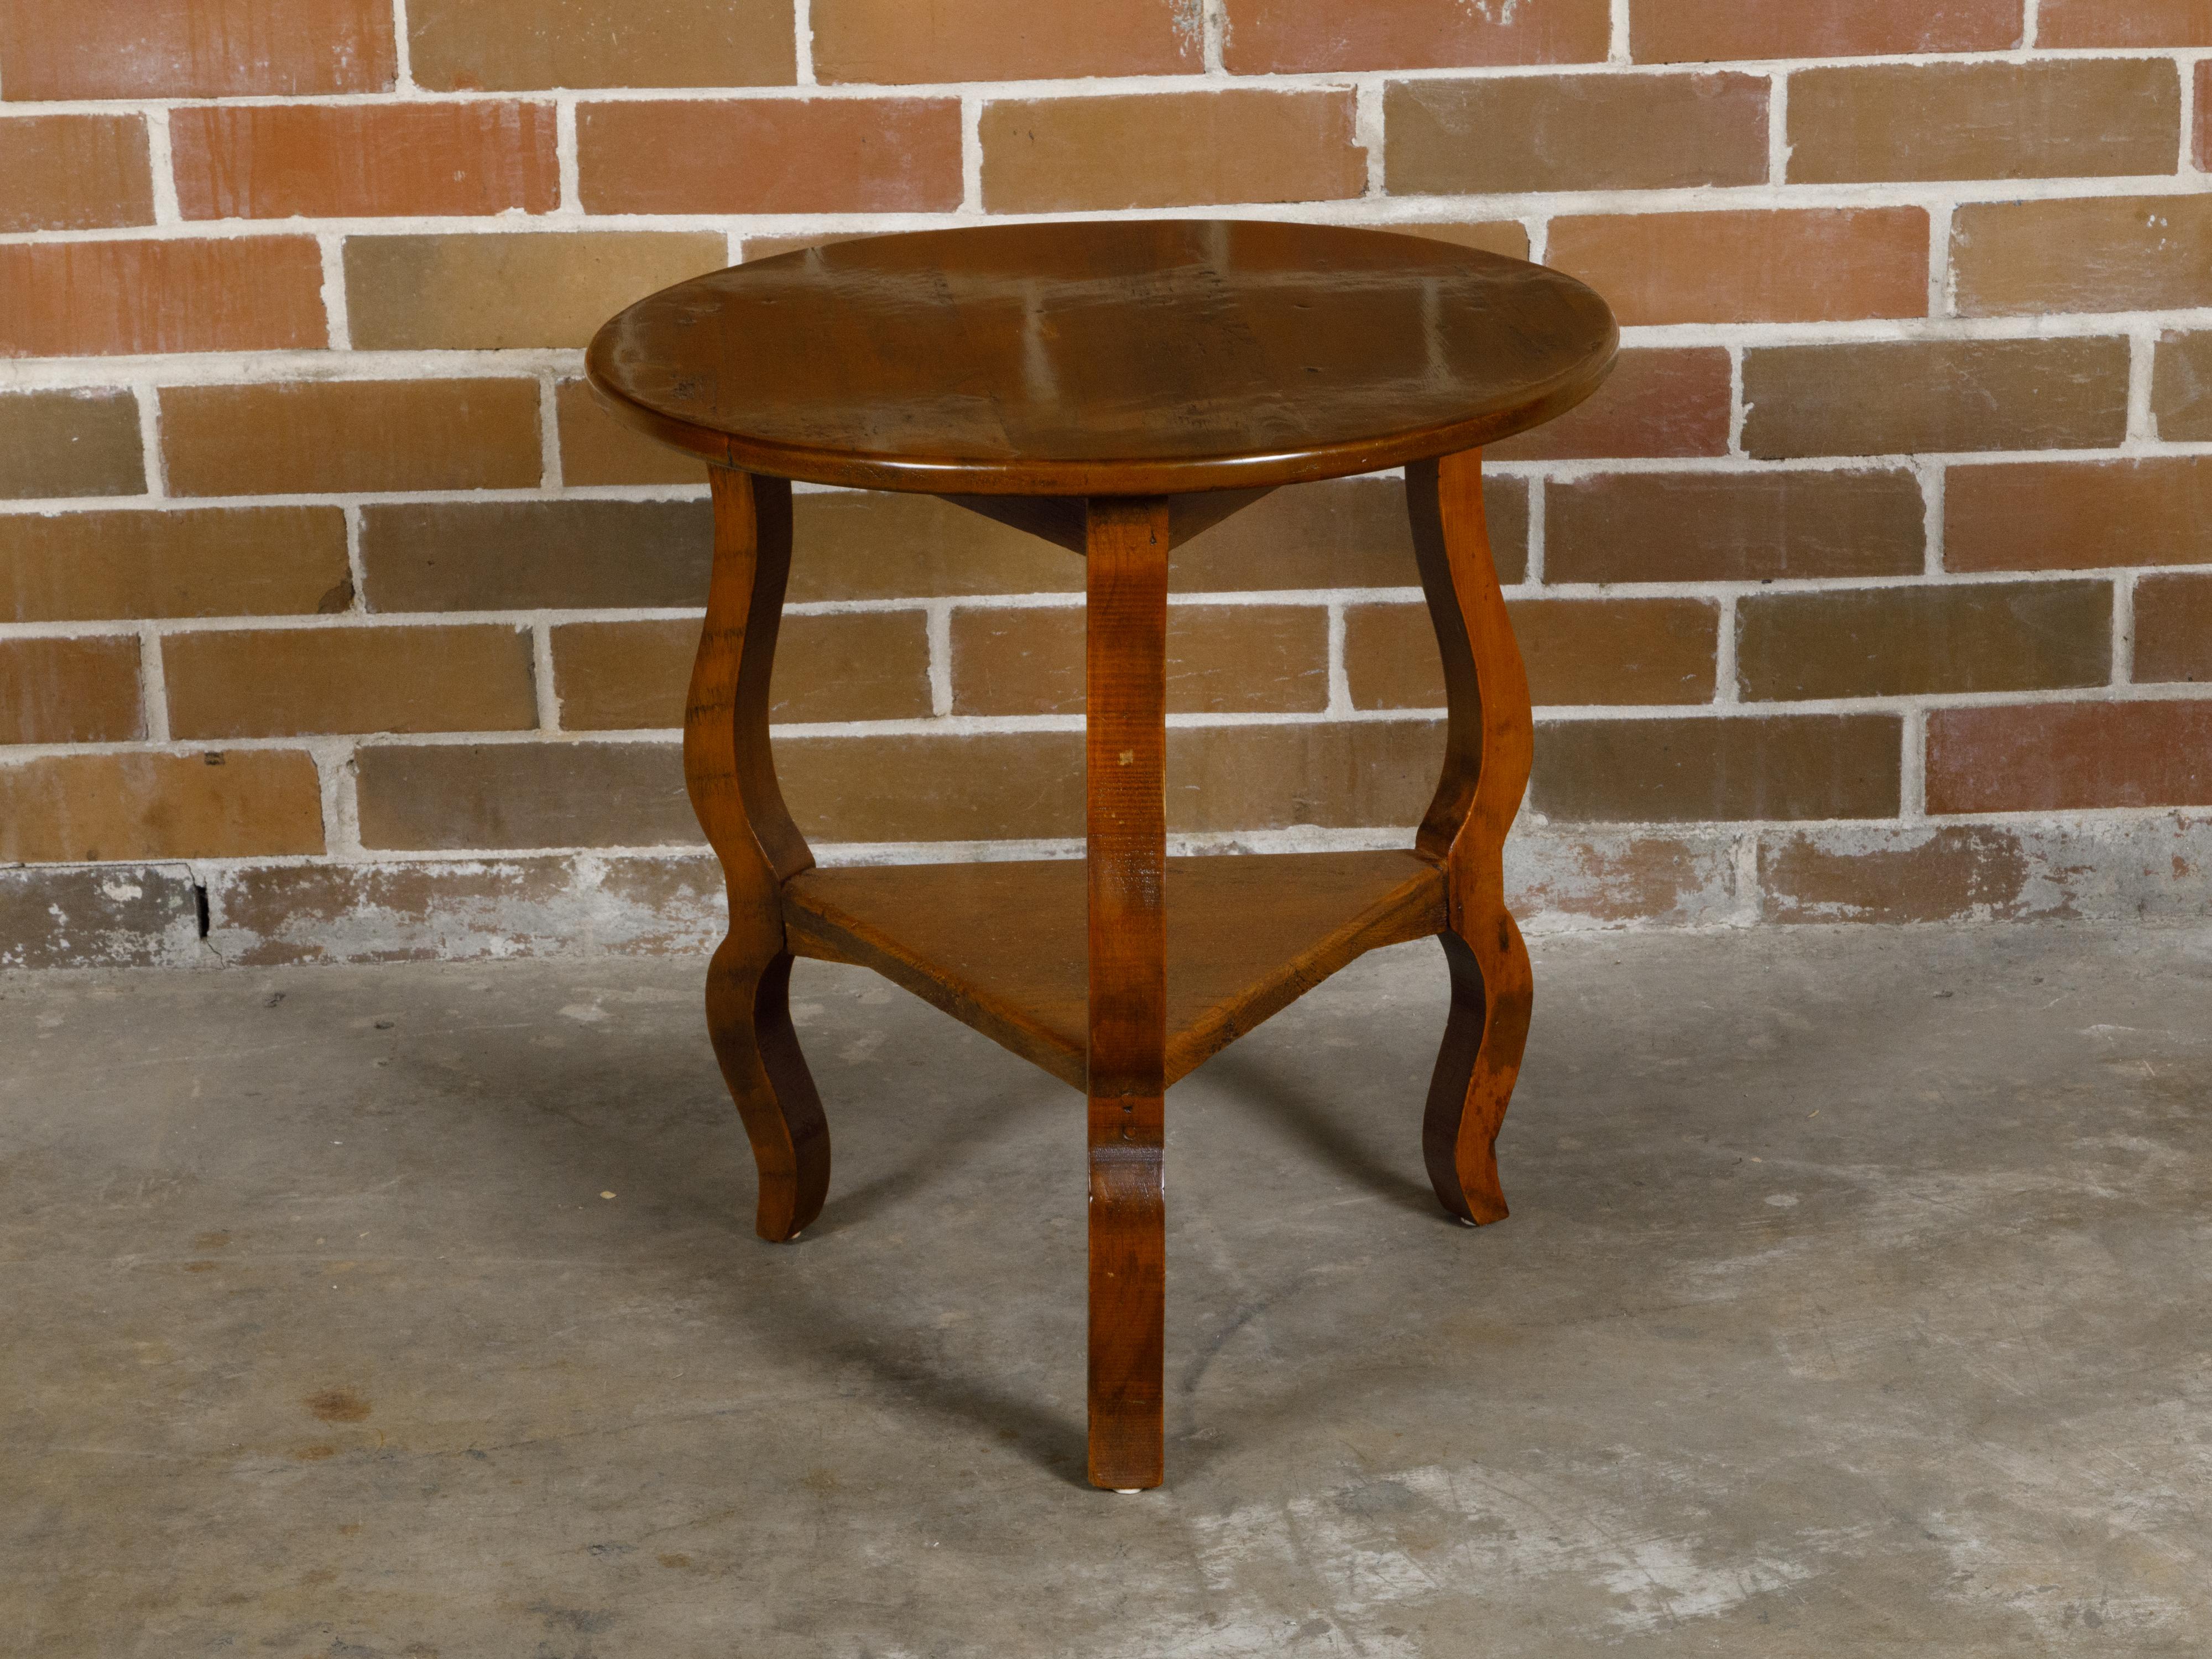 An English pine side table with circular top, curving legs and triangular shelf. This English pine side table, dating from the late 19th to early 20th century, offers a blend of rustic charm and elegant design with its circular top and trio of